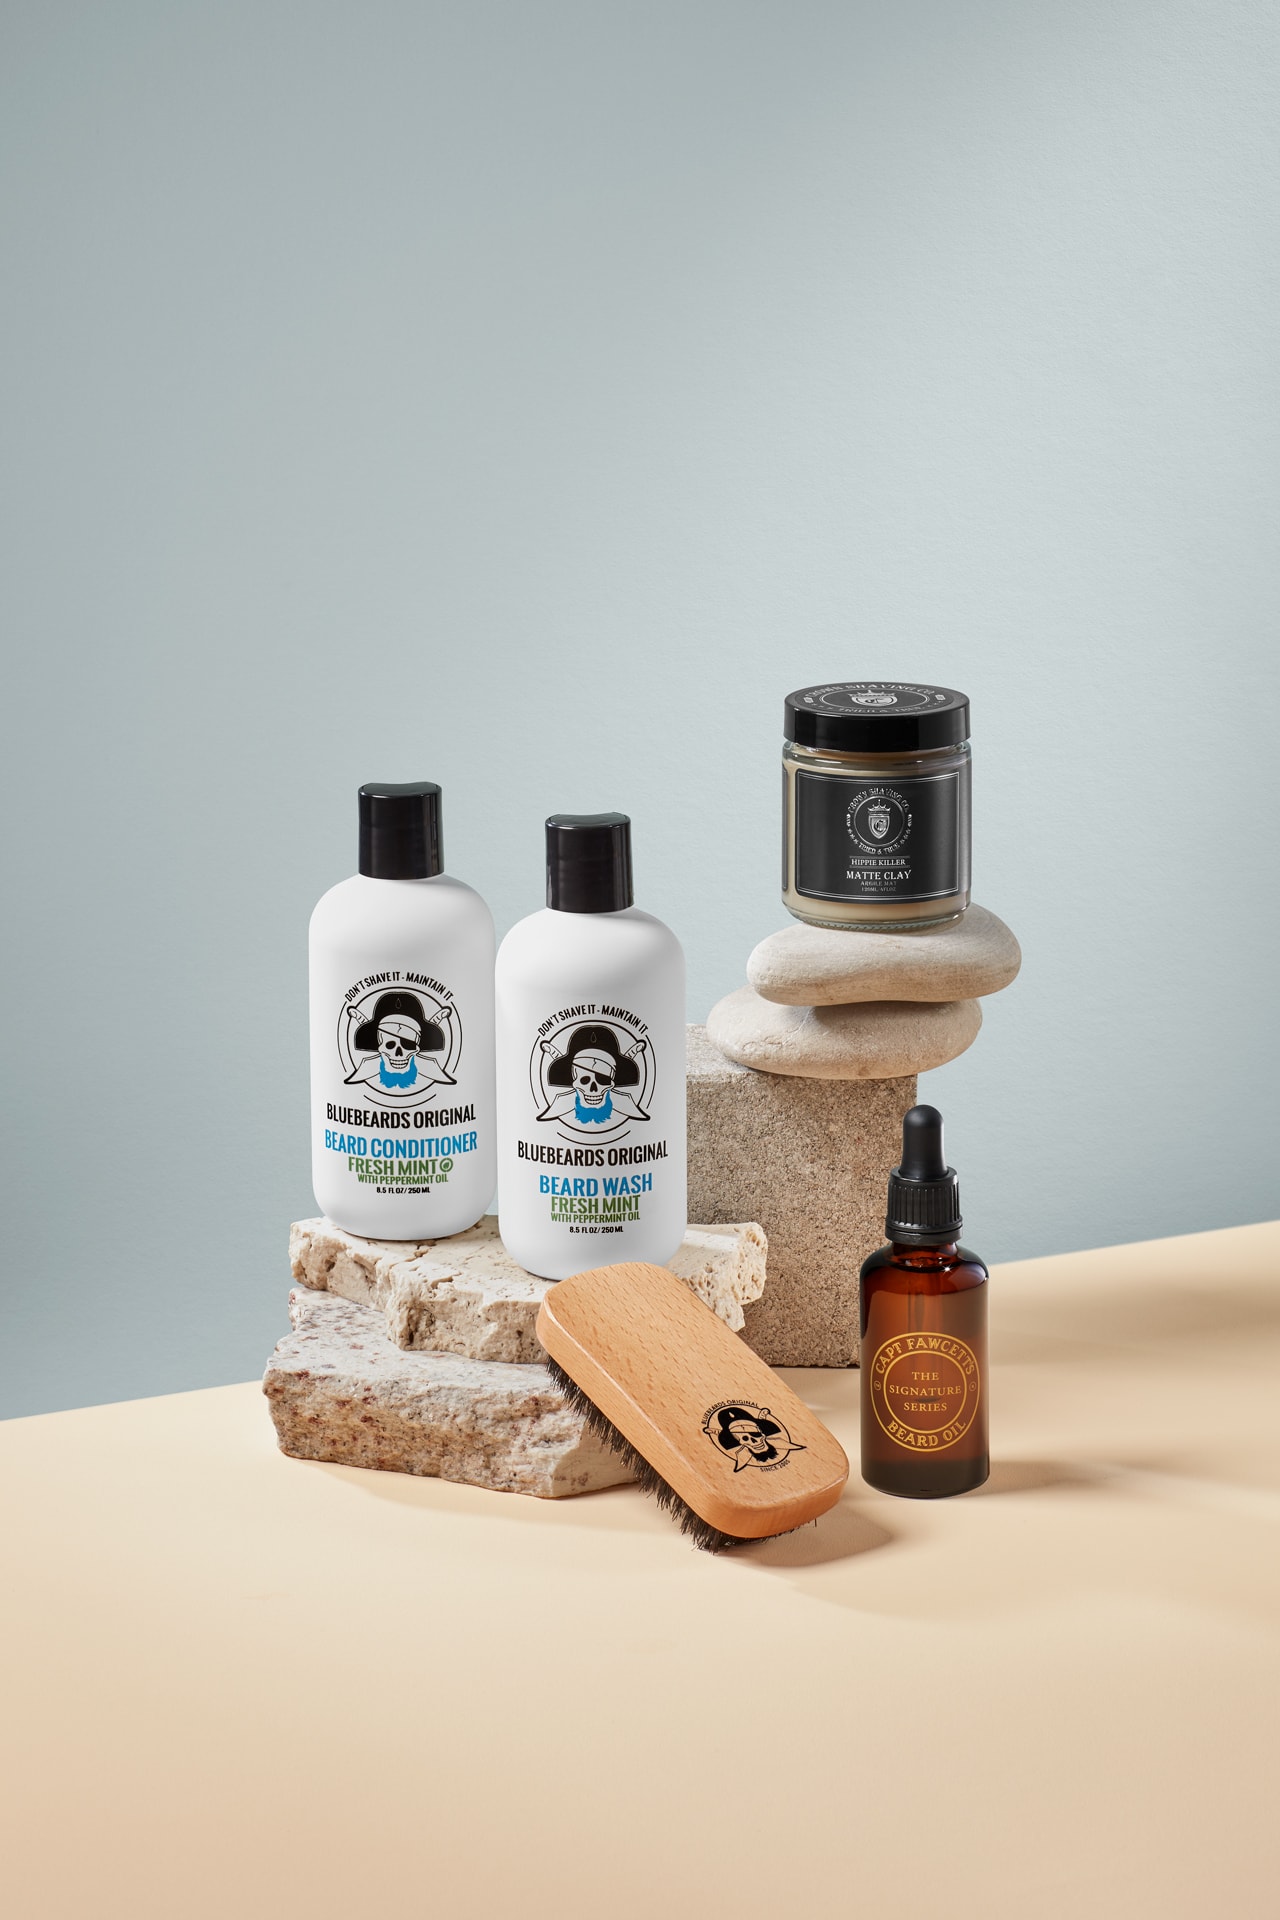 Mast Wise Schaf Canadian curated selection of grooming essentials for men finest blades, brushes, beard oils, shaving soaps, skincare, fragrances, aftershave “Different Strokes” video series Indigenous educator Michael Solomon, longtime radio personality Devo Brown and comedian Aaron Heels ian Rosen